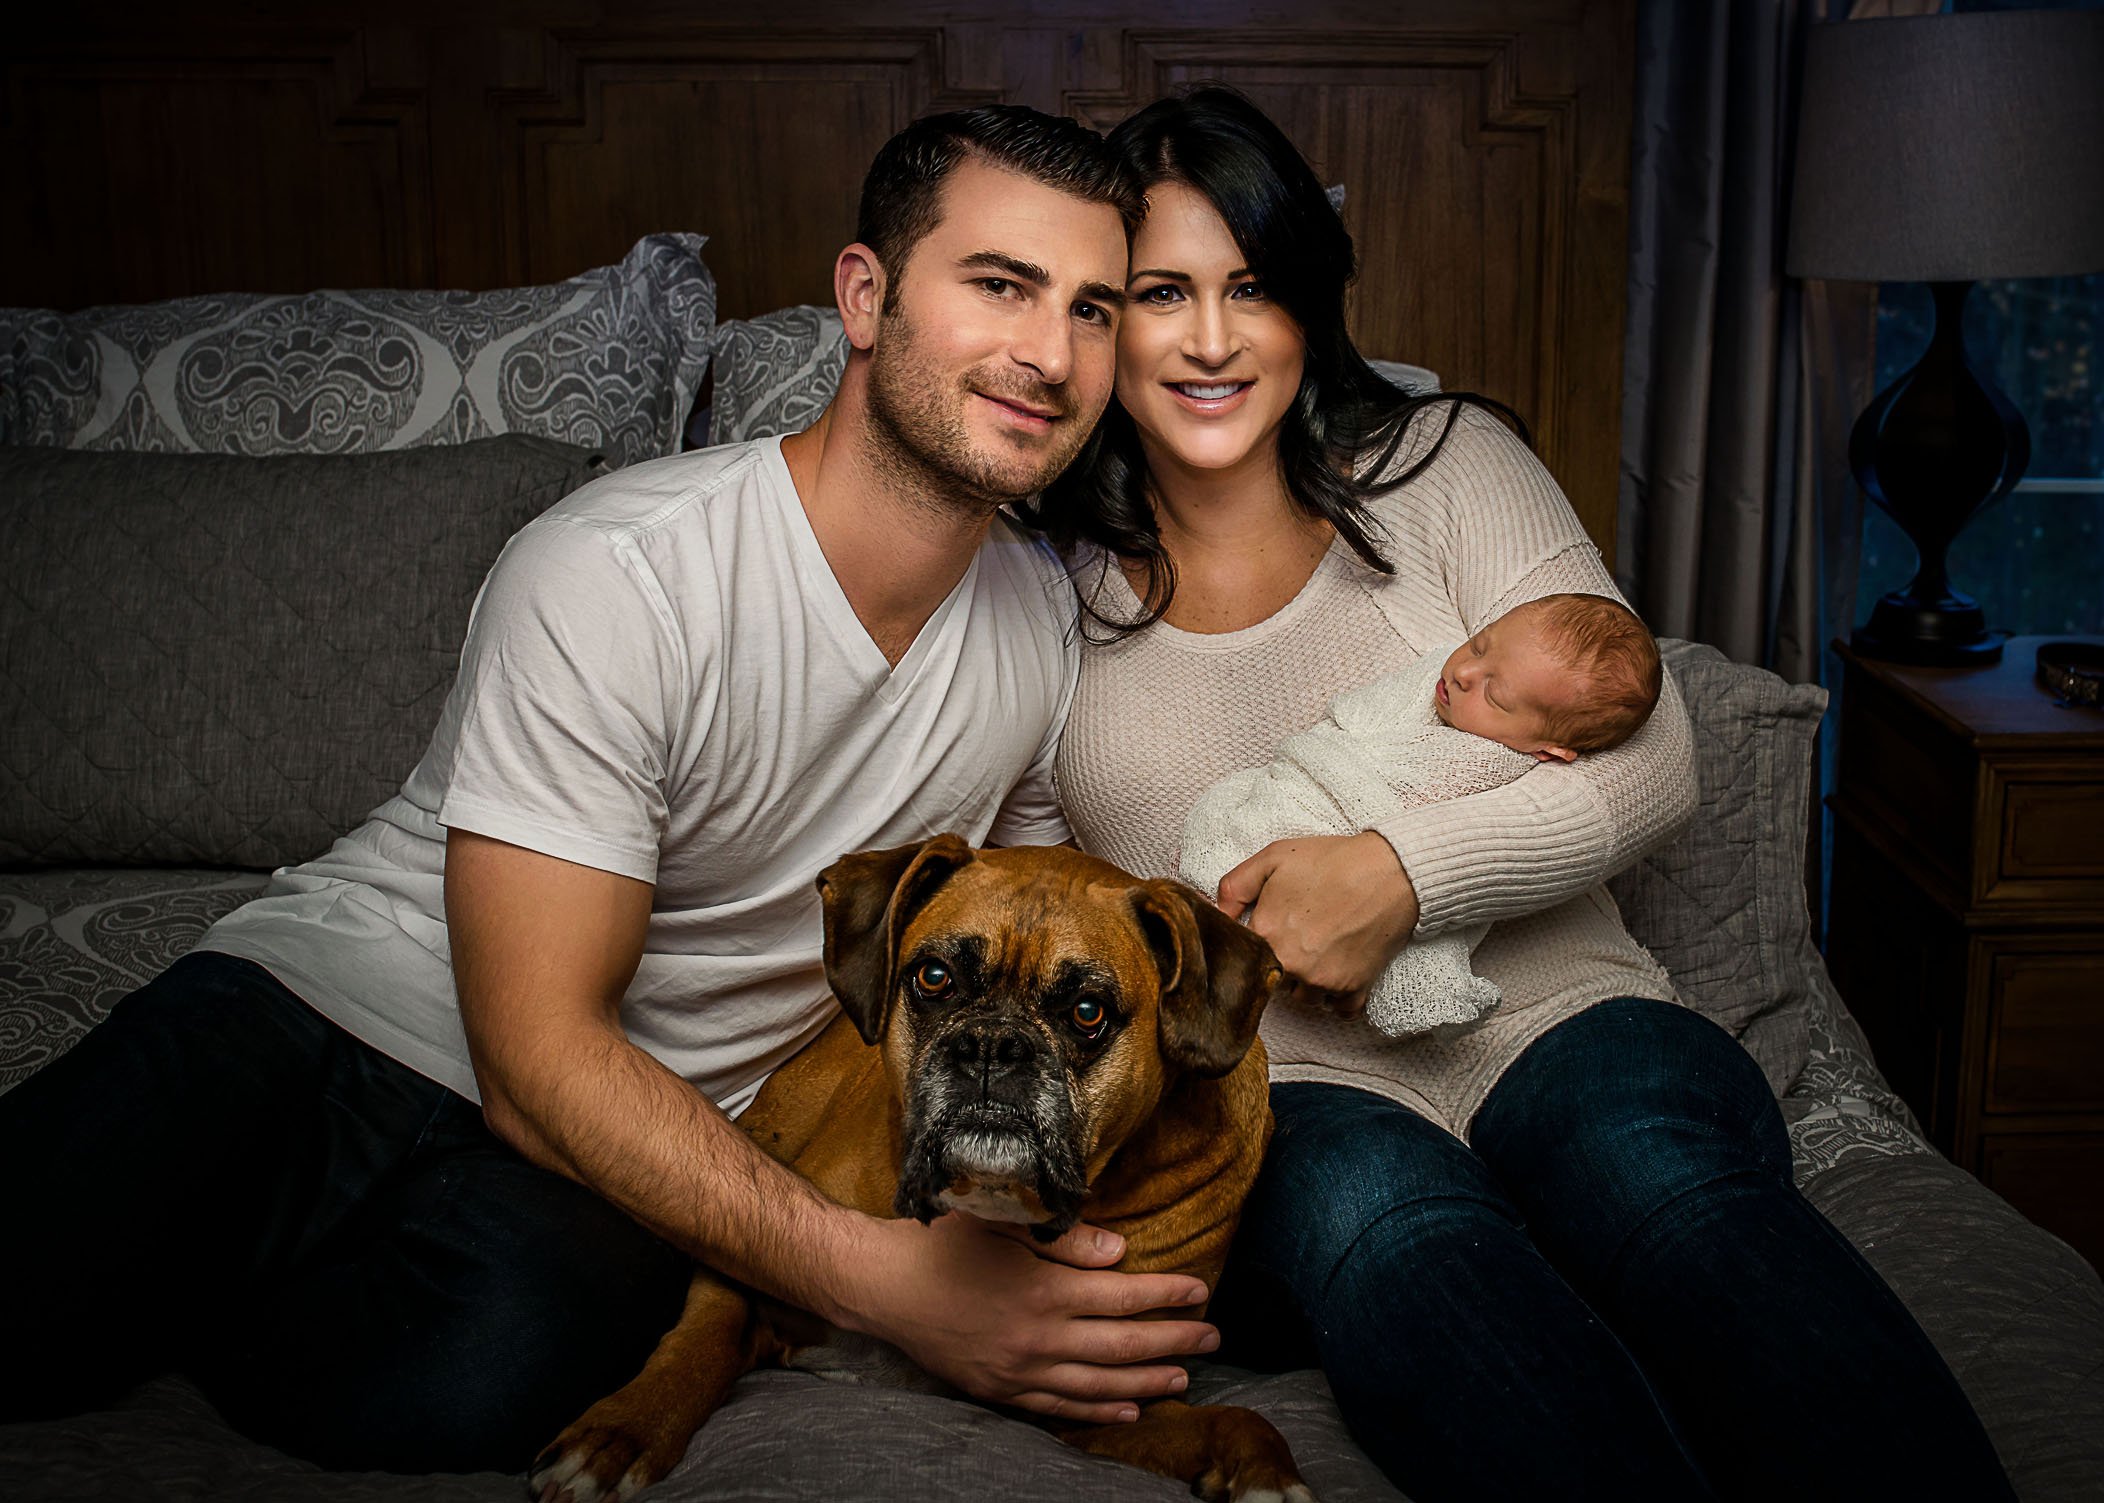 New mom and dad with their dog and newborn baby girl